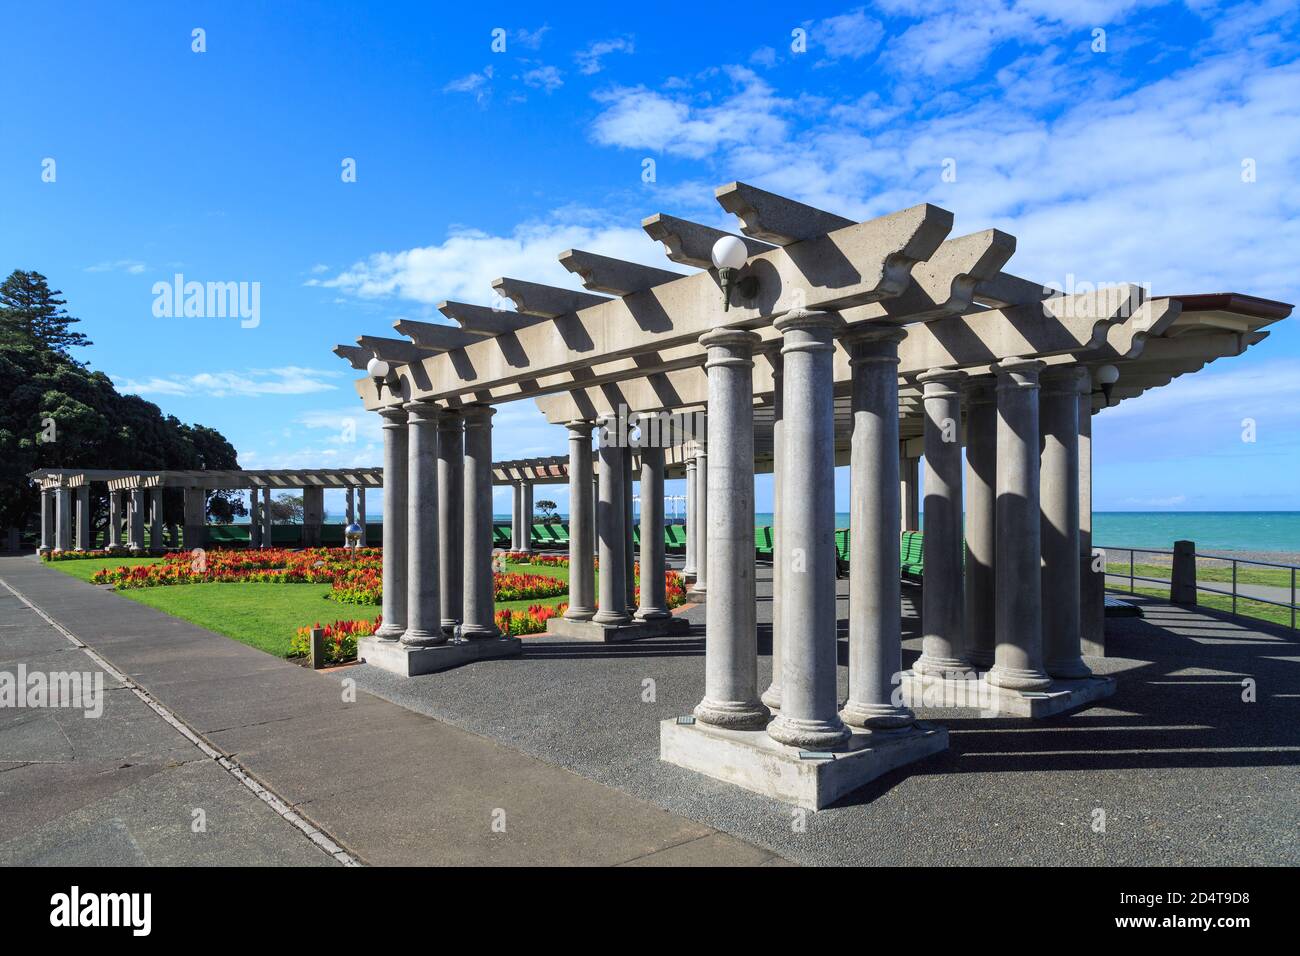 Napier, New Zealand. The 'Veronica Sunbay', a curved arcade of columns in a waterfront park Stock Photo